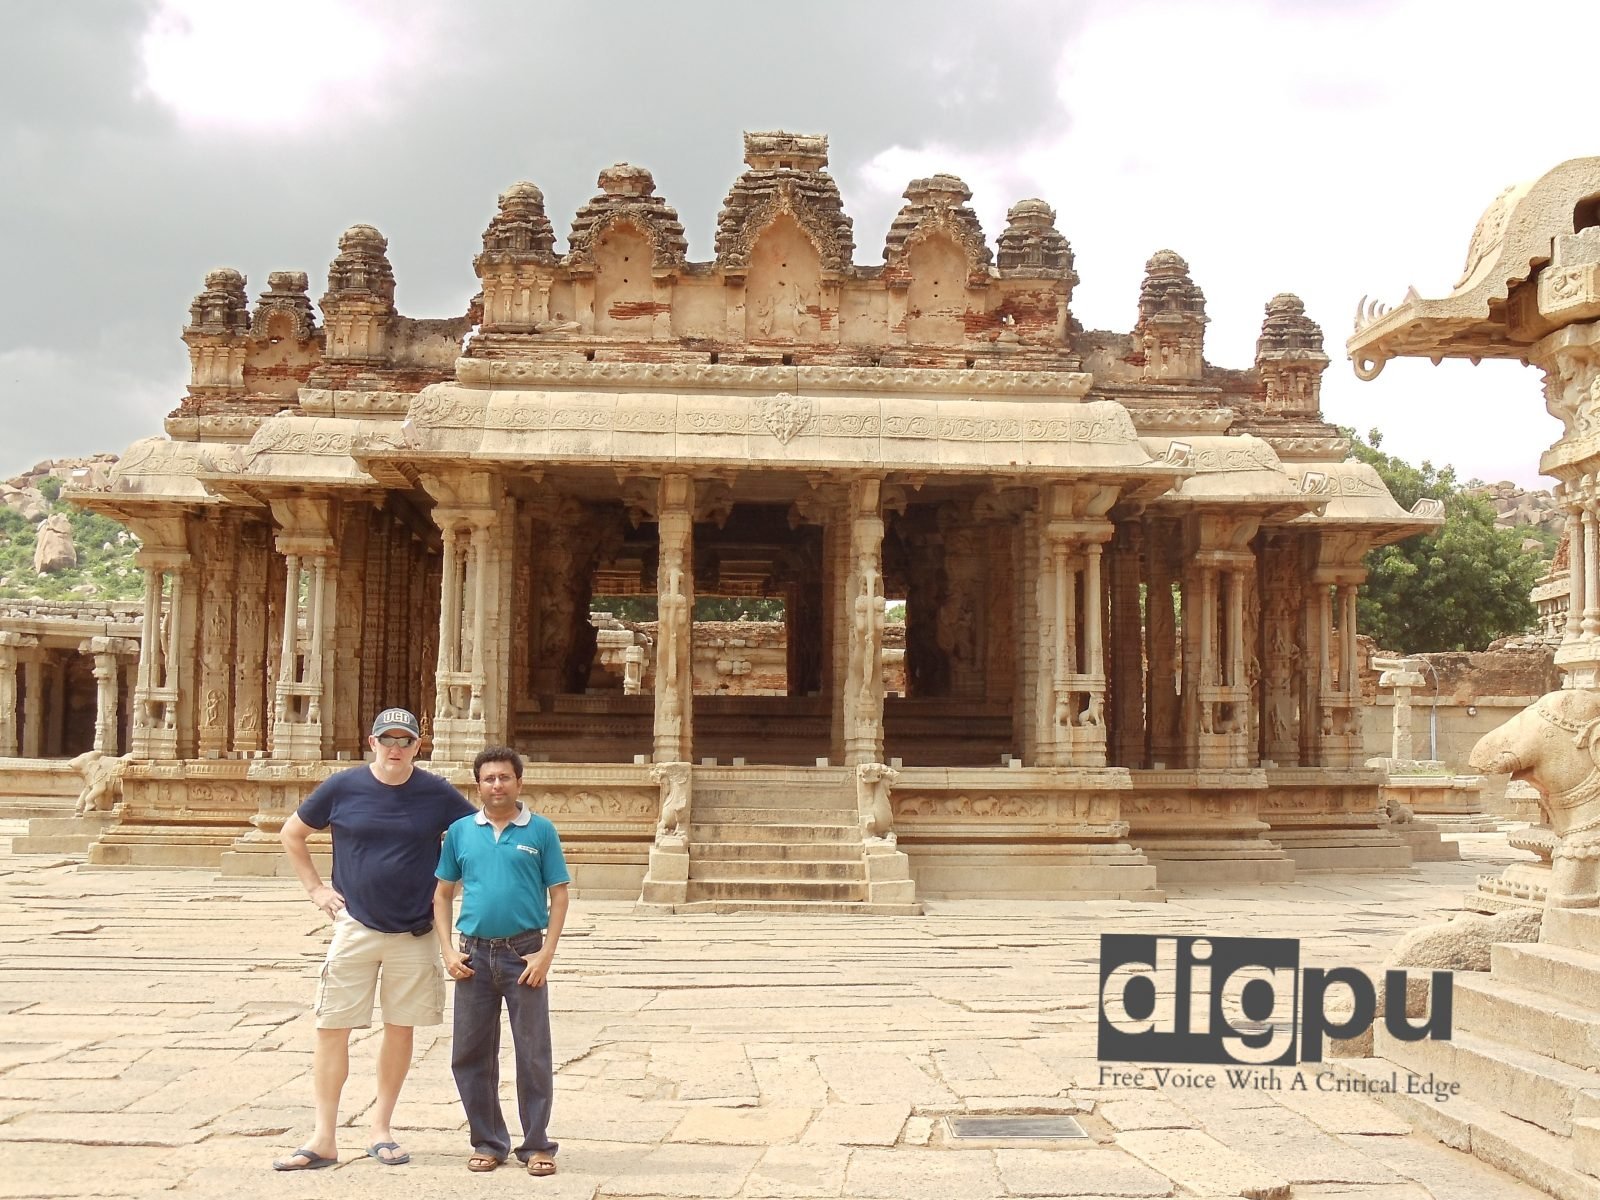 Hampi, the 'lost city' remains the most popular spot for International tourists